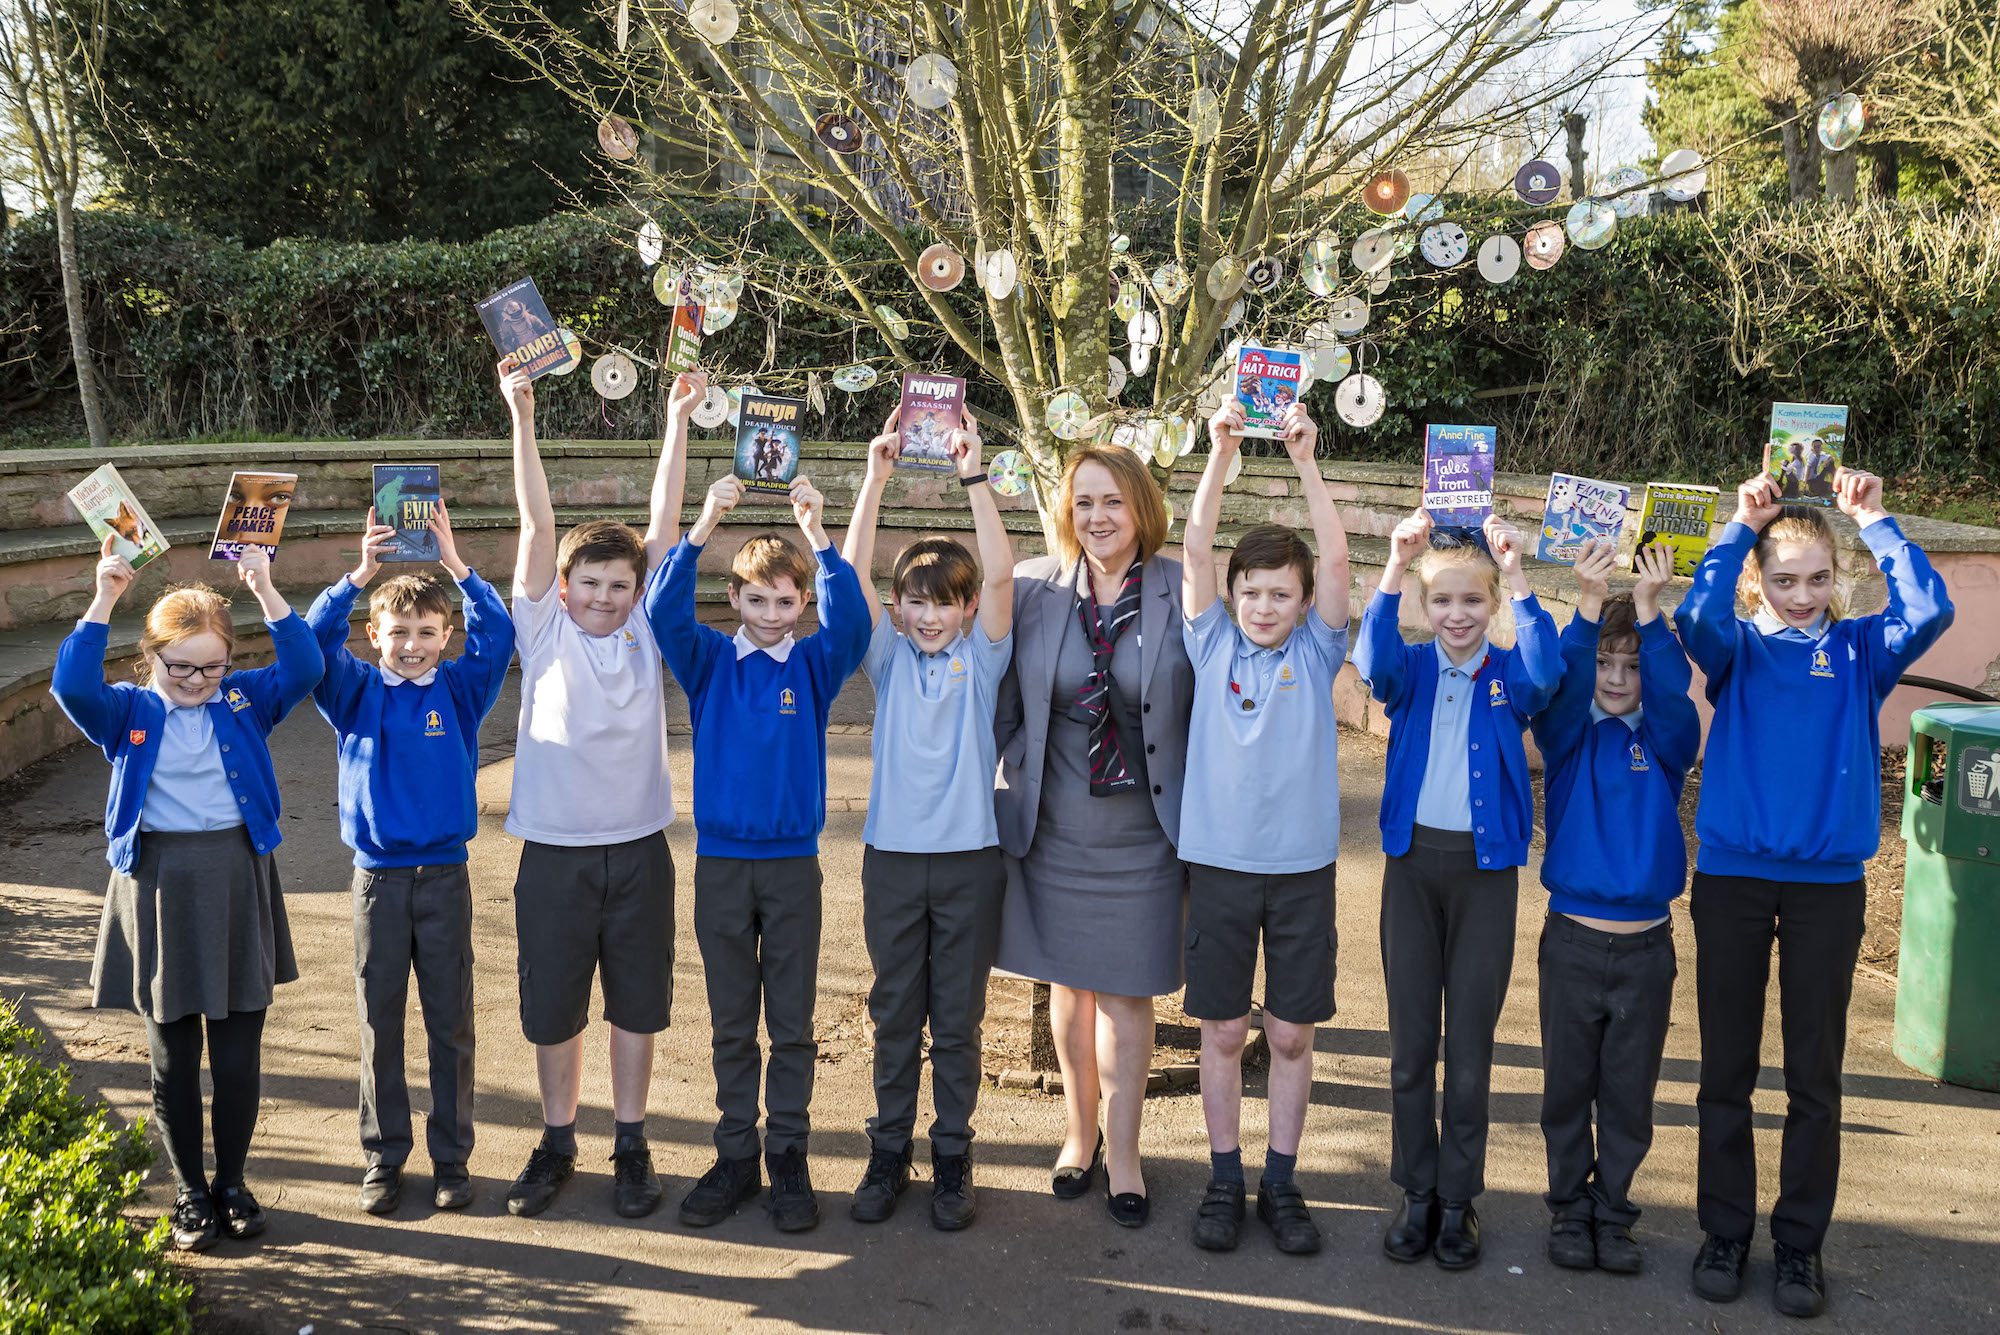 Peveril Homes funds new books at Packington Primary School